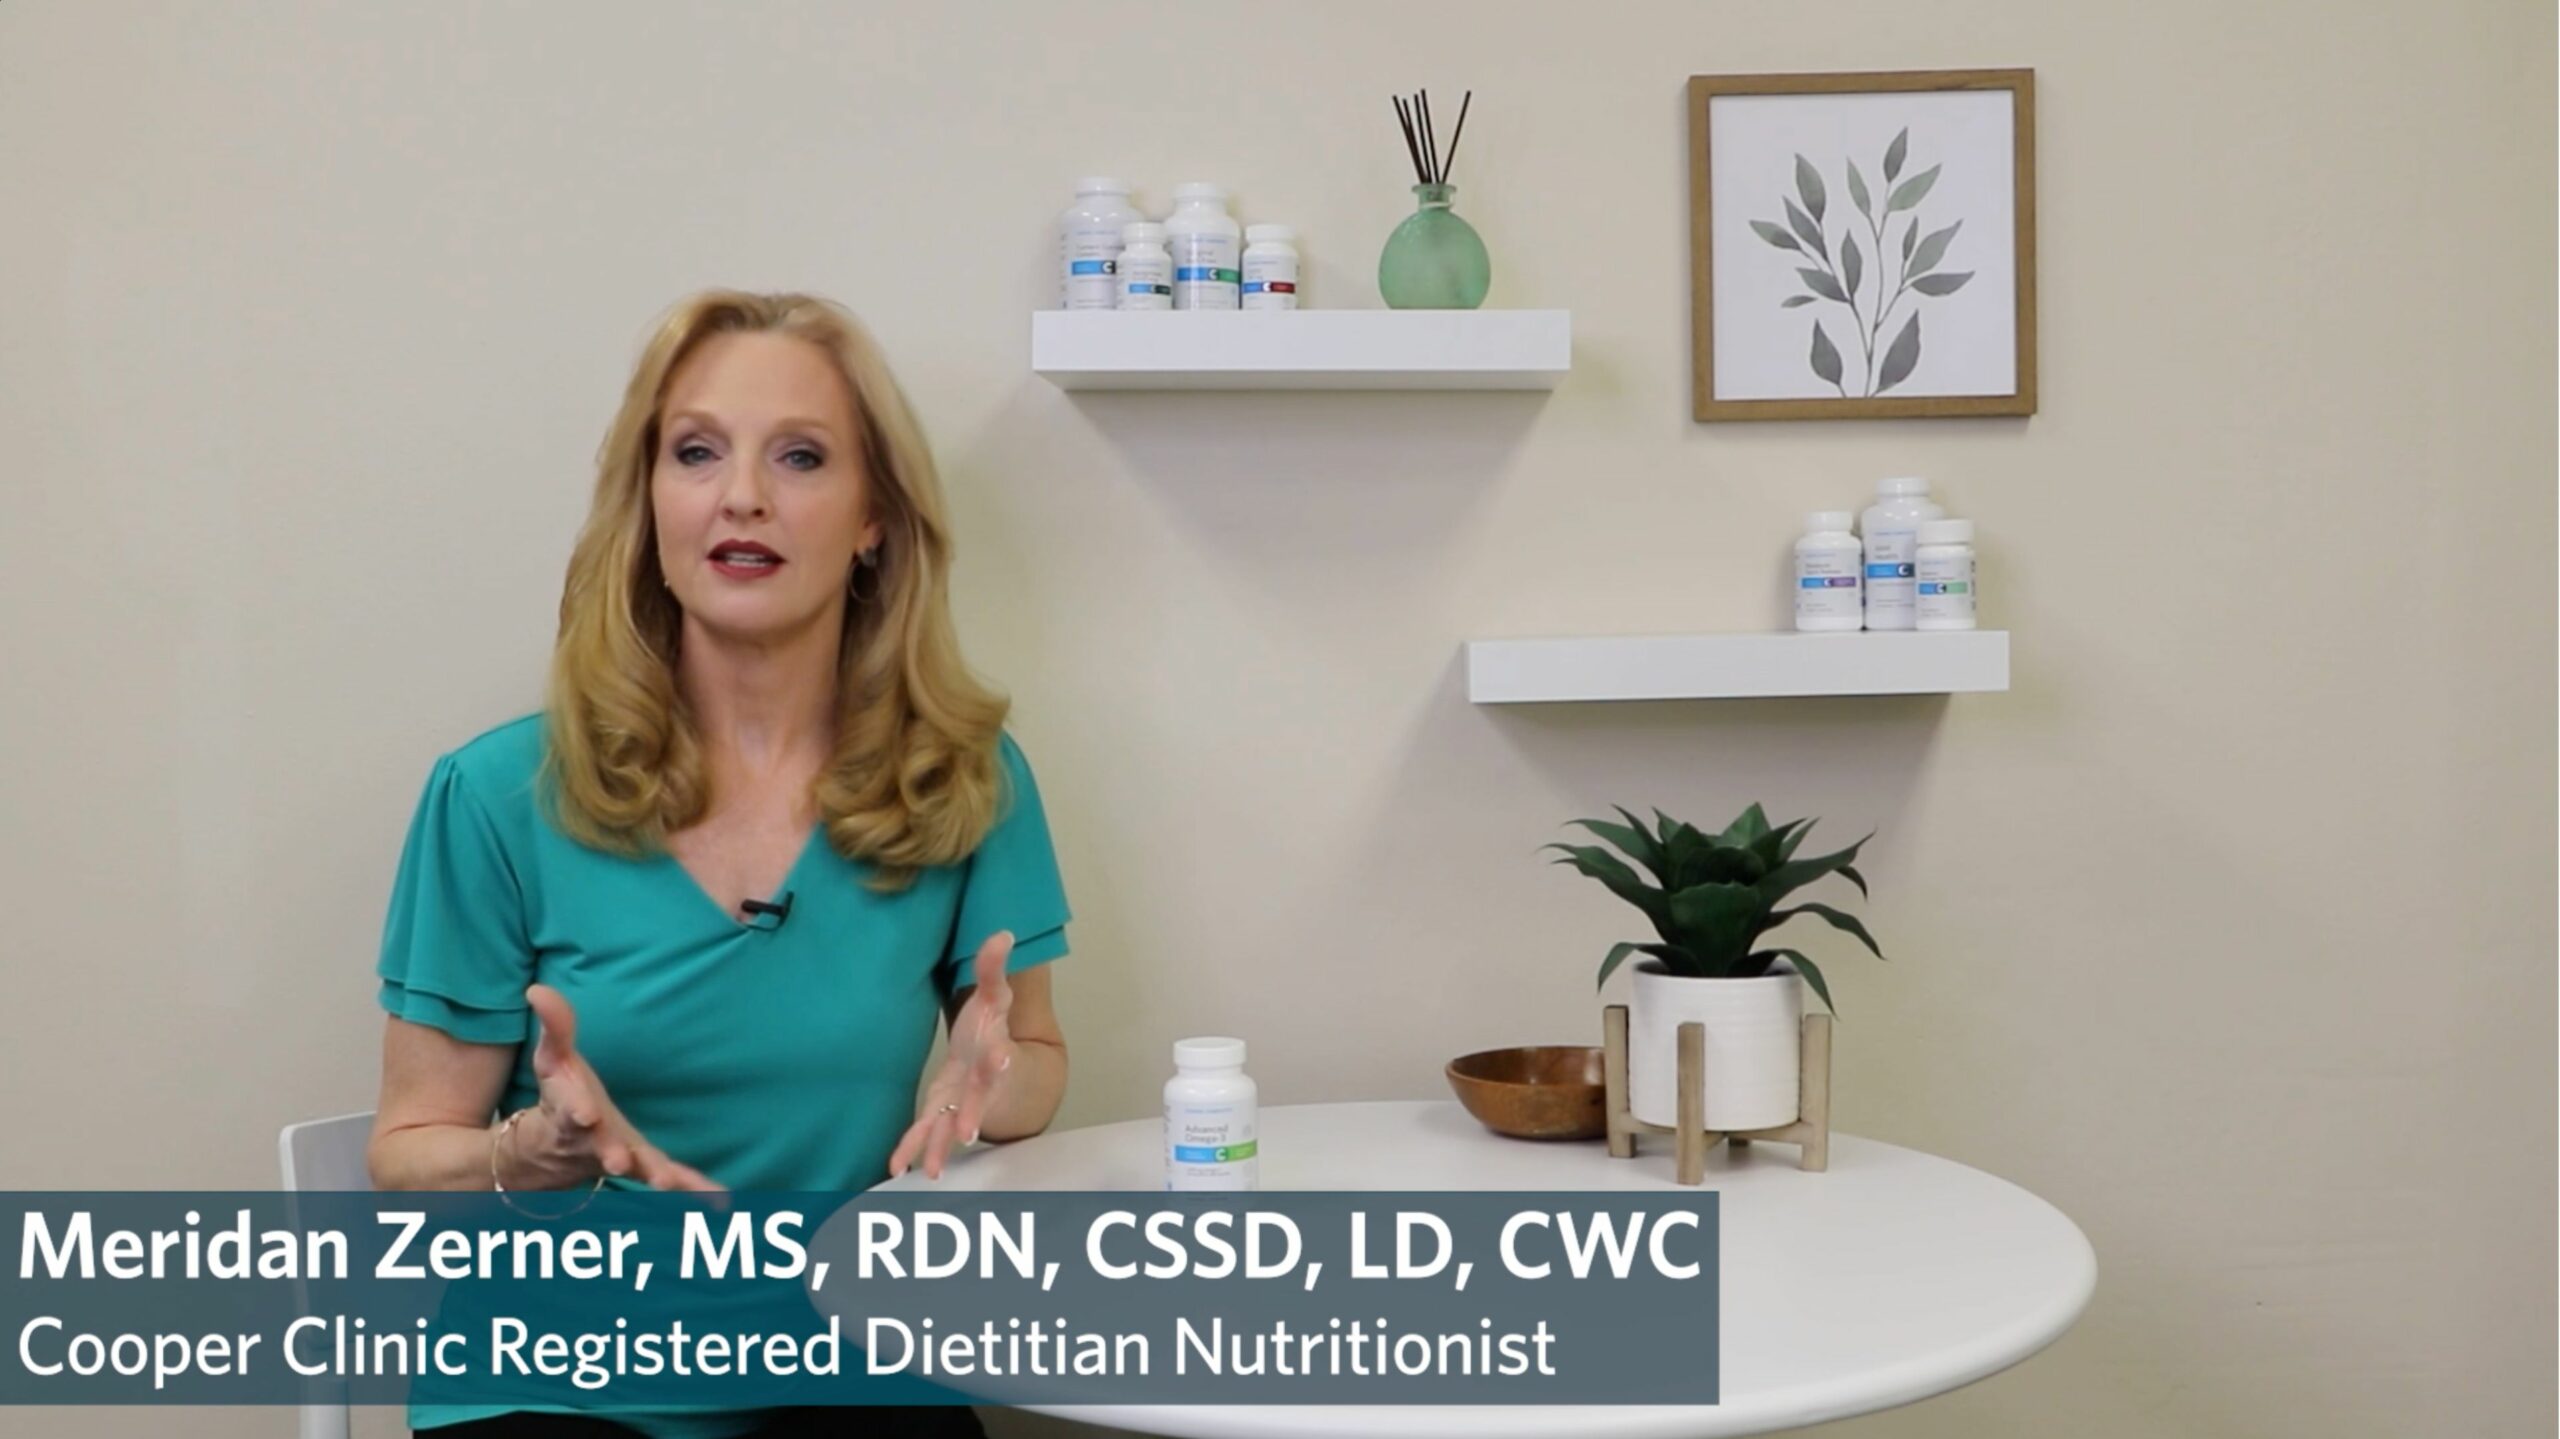 Photo of Meridan Zerner, MS, RDN, CSSD, LD, CWC, Cooper Clinic and Cooper Fitness Center Registered Dietitian Nutritionist